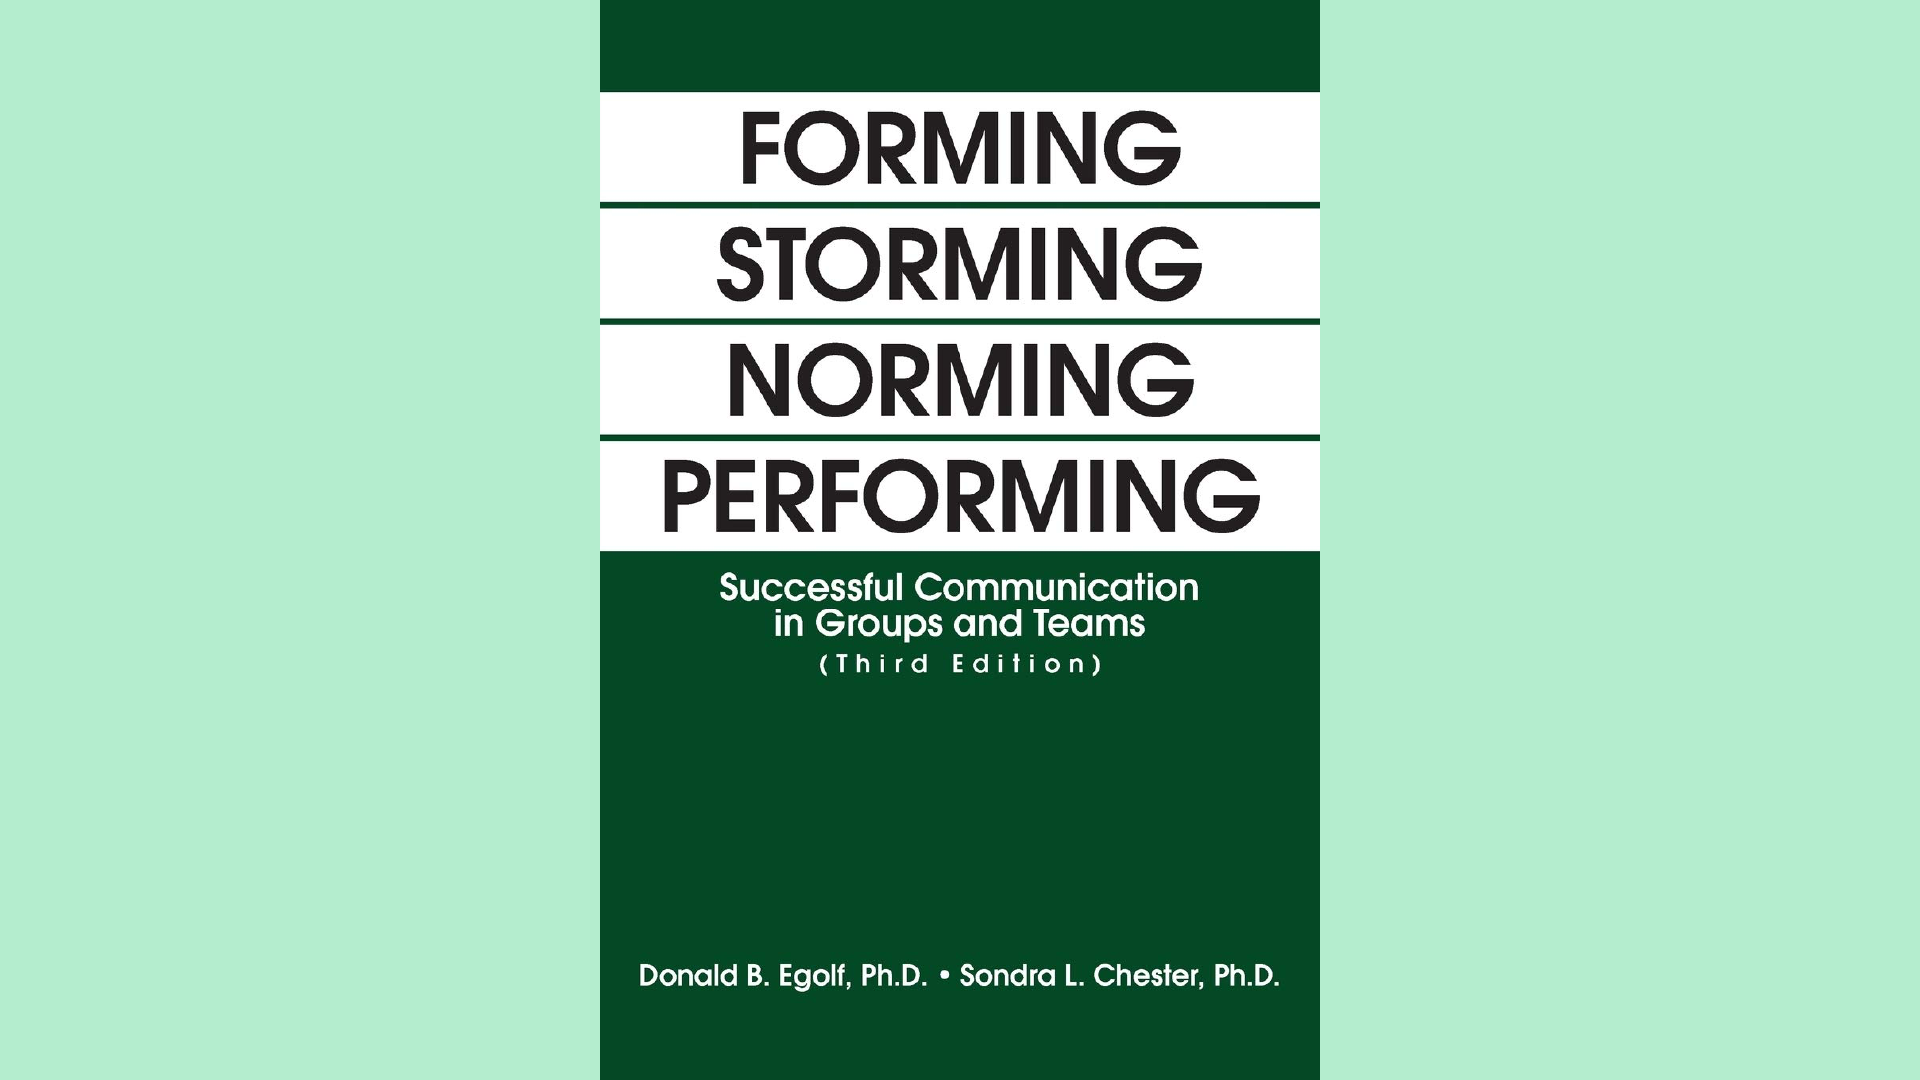 Summary: Forming Storming Norming Performing by Donald B. Egolf